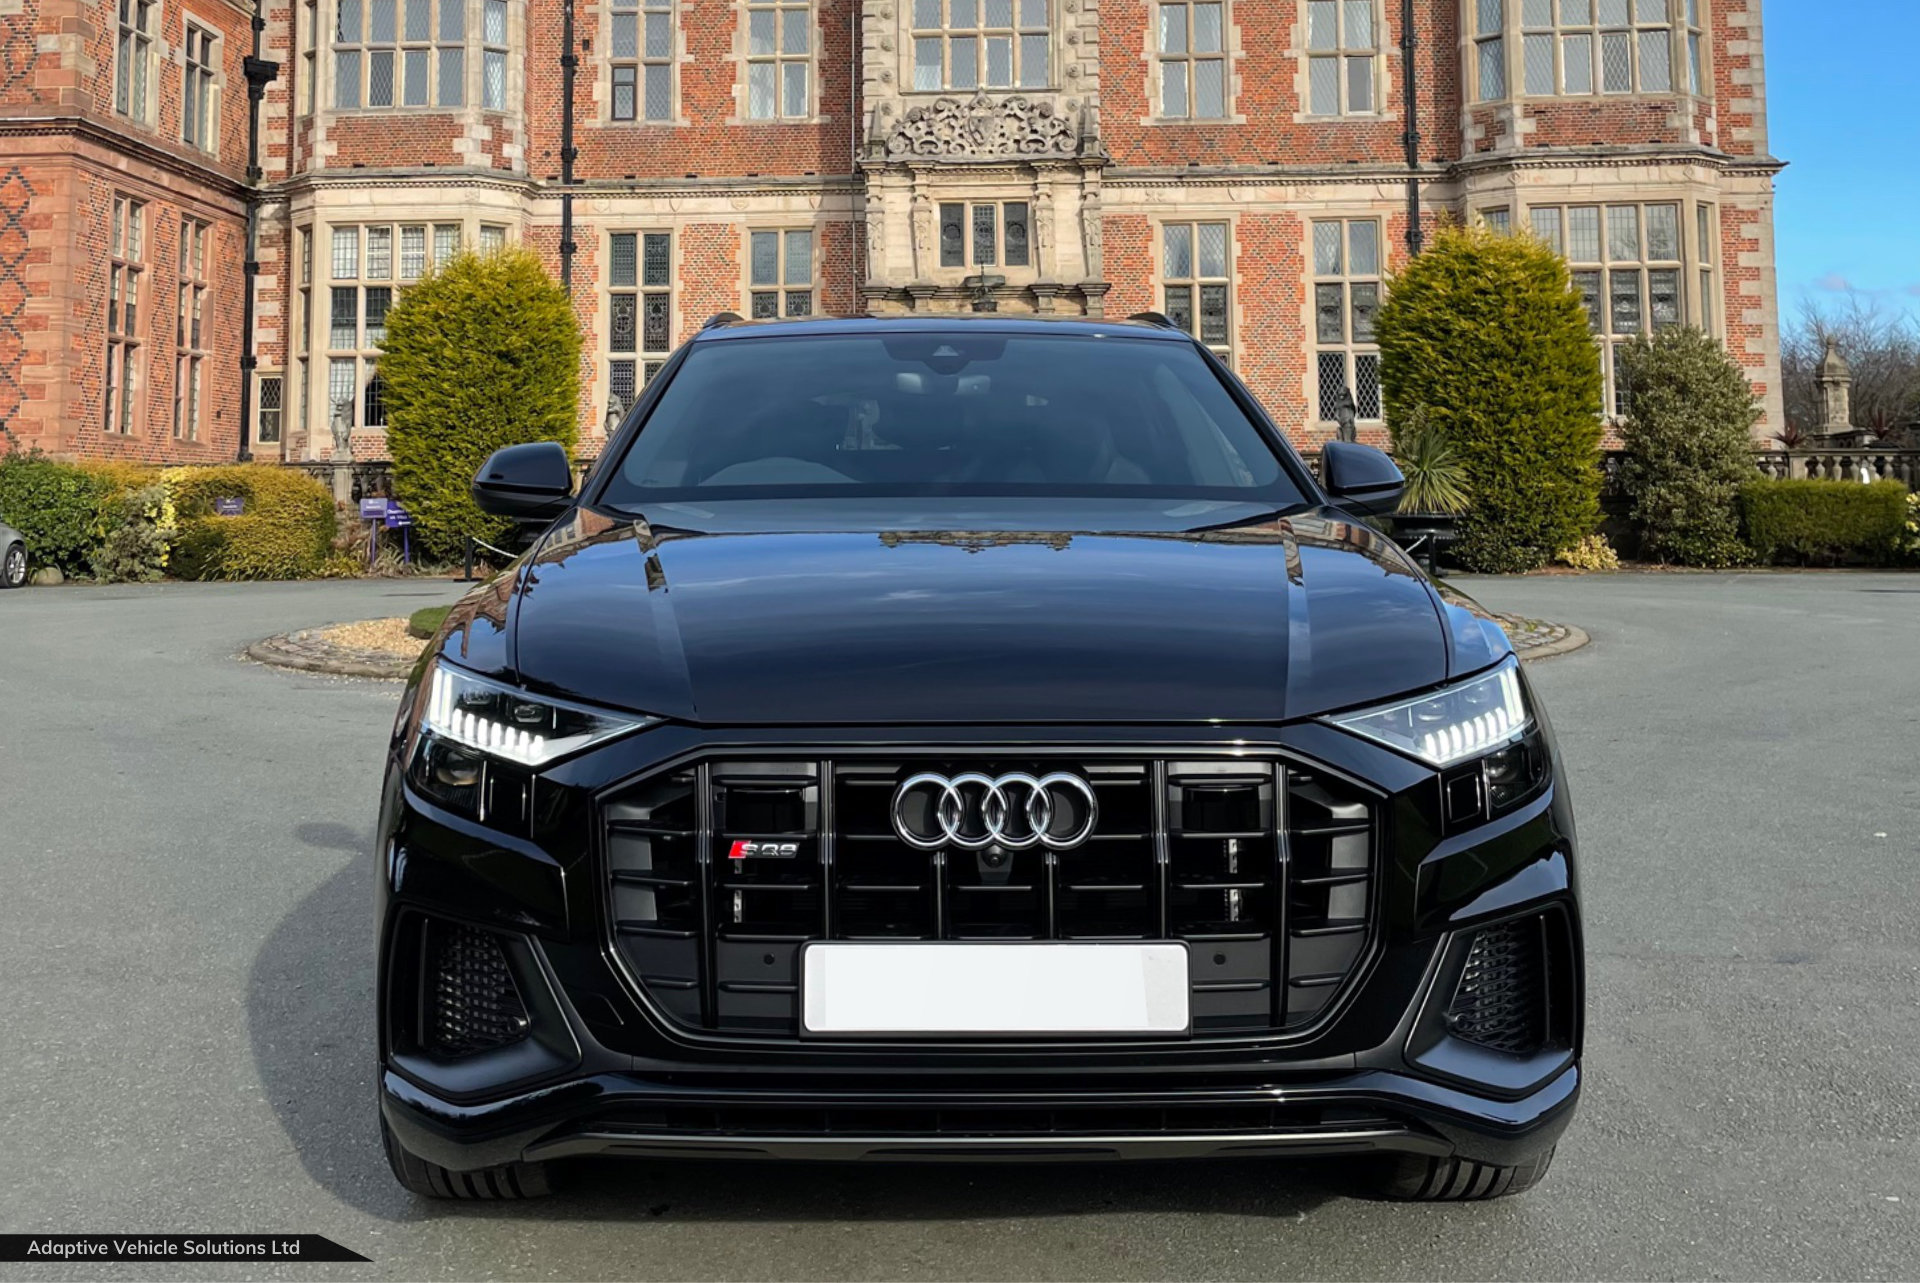 Audi SQ8 Black Edition 507PS front view